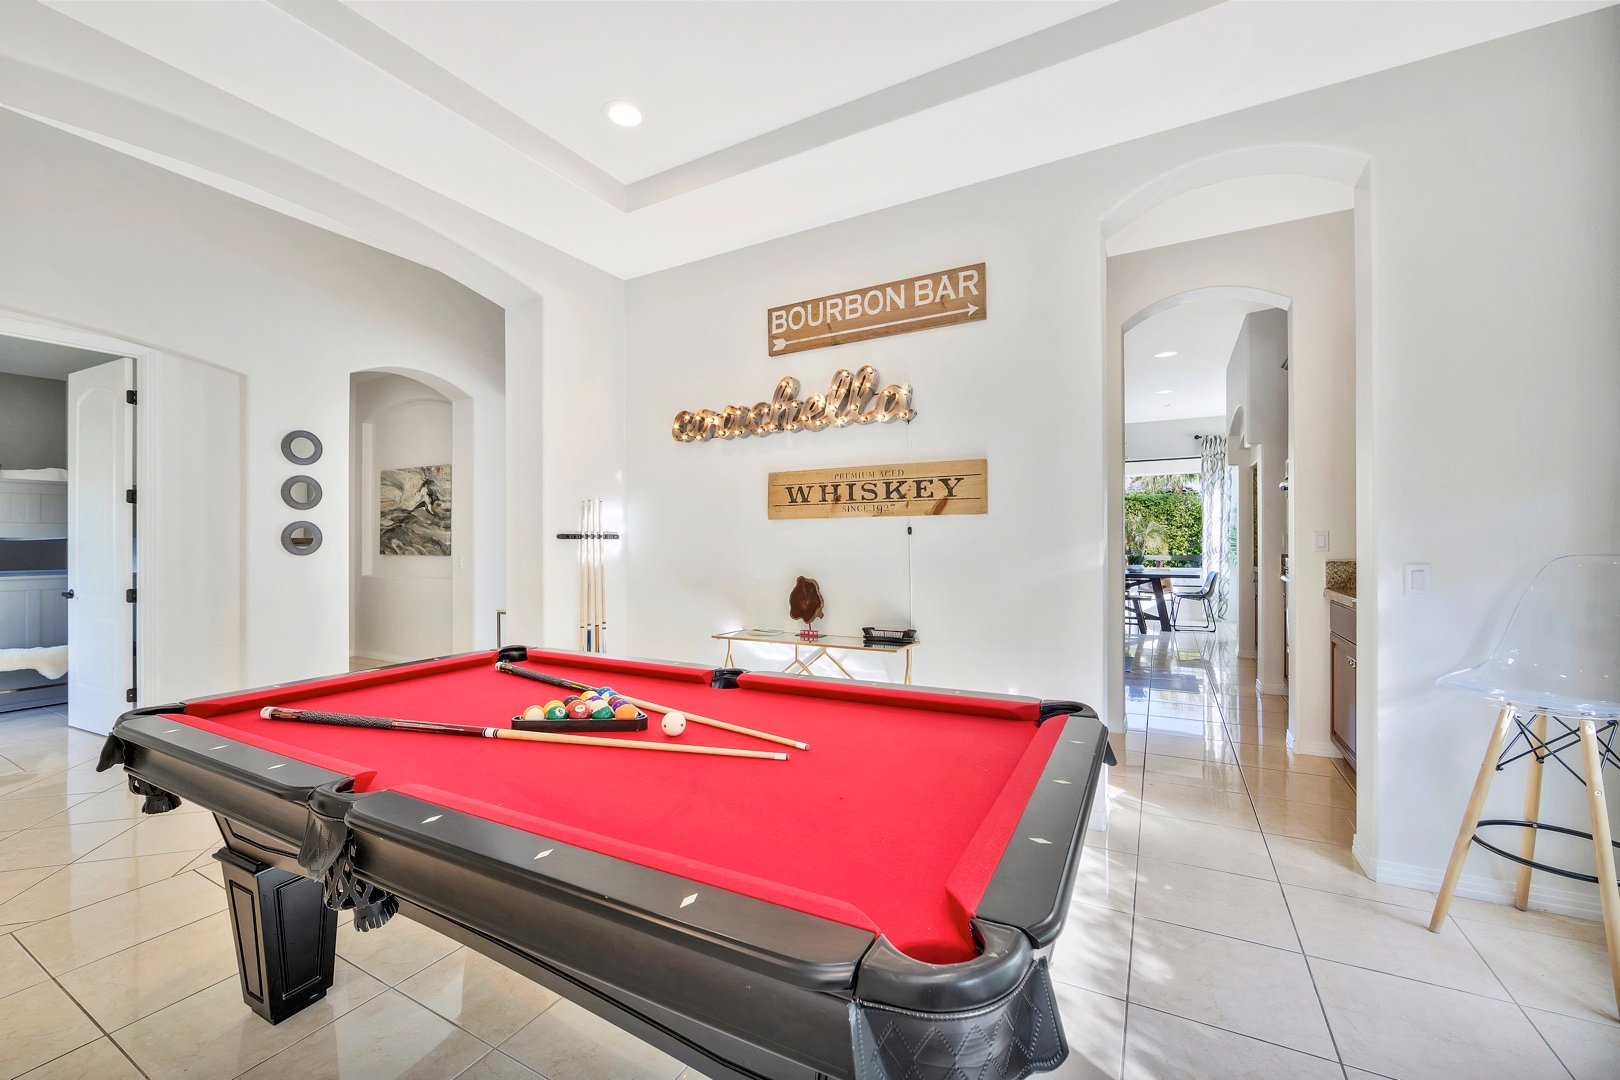 The pool table room is a favorite hangout for guests